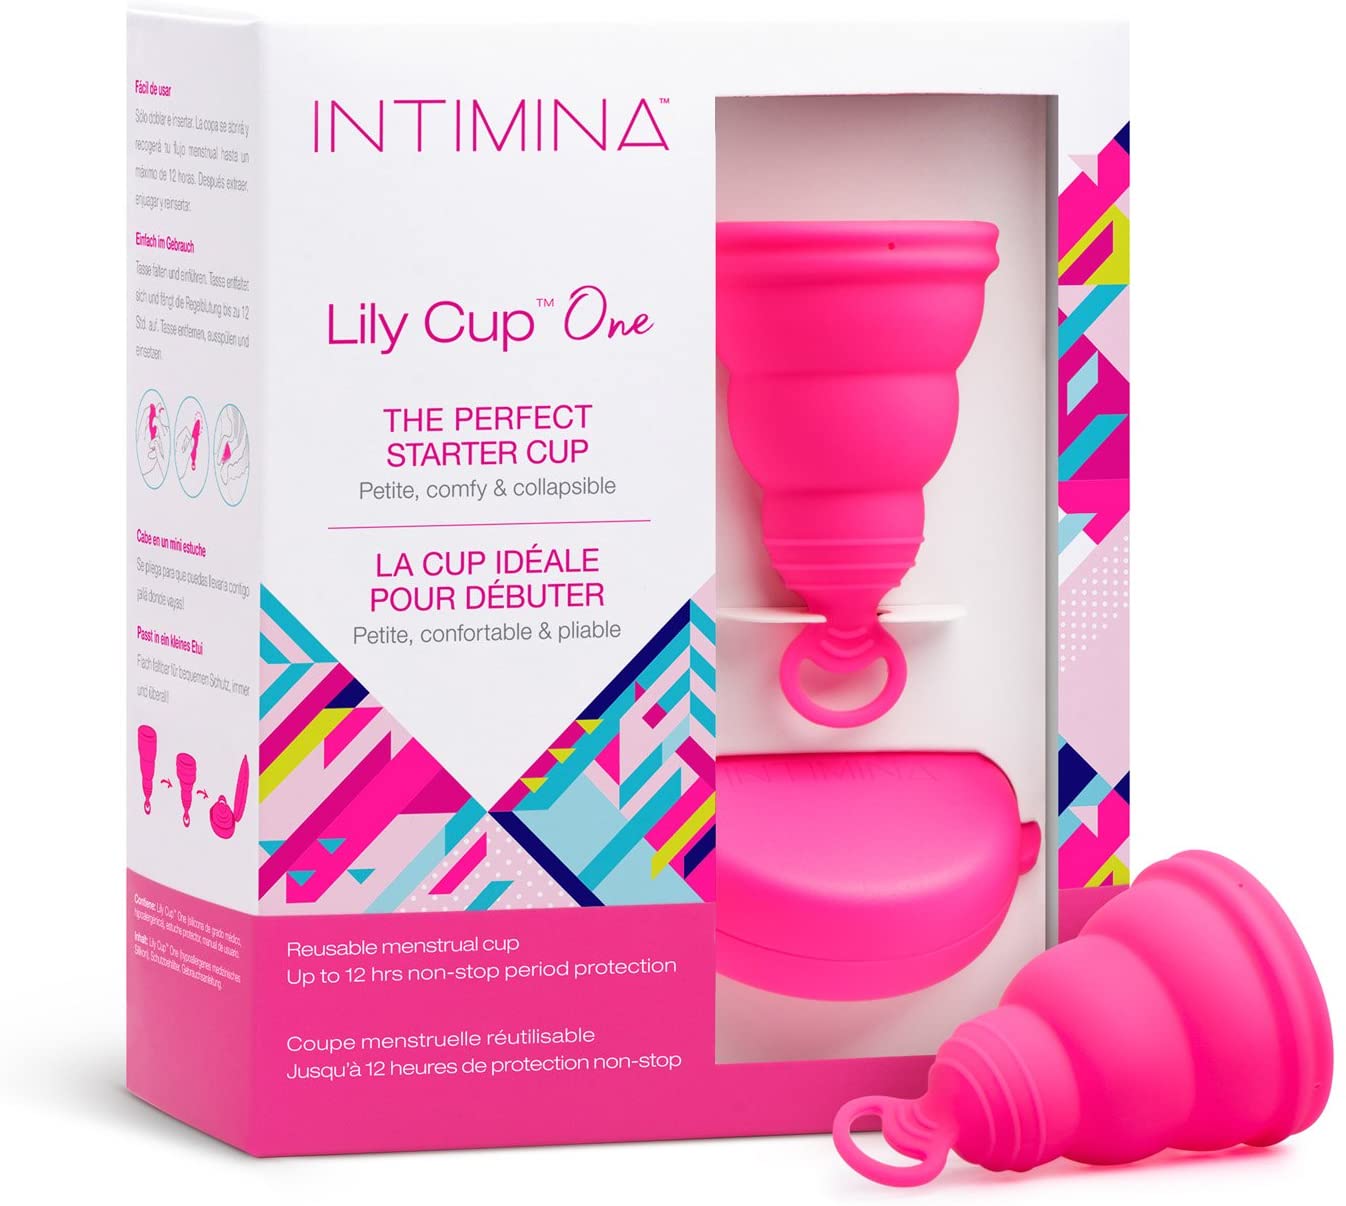 Lily Cup One The Perfect Starter  Menstrual Cup Cup #6065 - Intimina